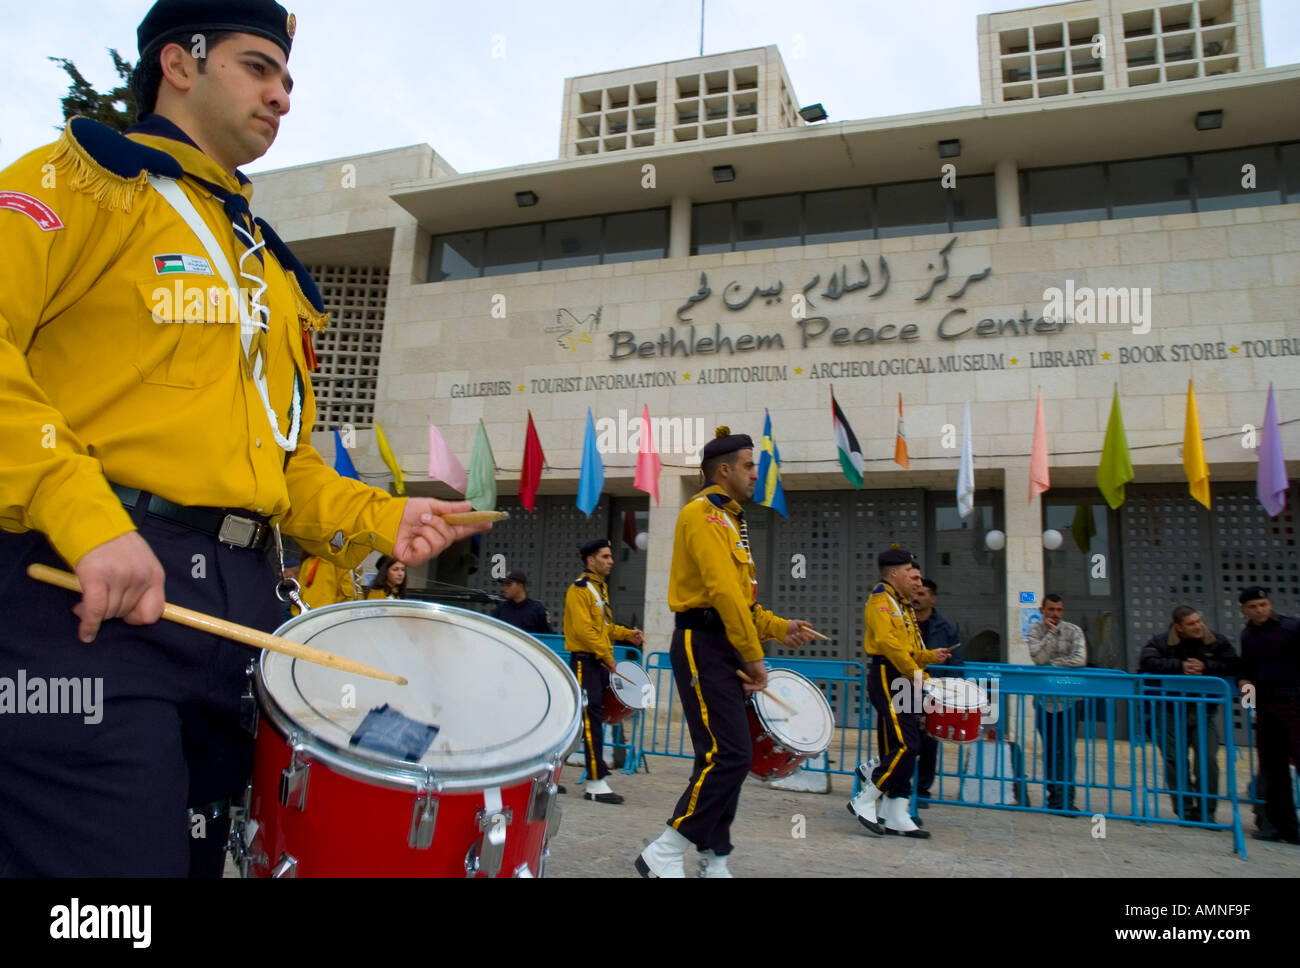 Palestinian Authority Bethlehem Manger Square close up of a scout drummer marching with Bethlehem Peace Center in bkgd Stock Photo